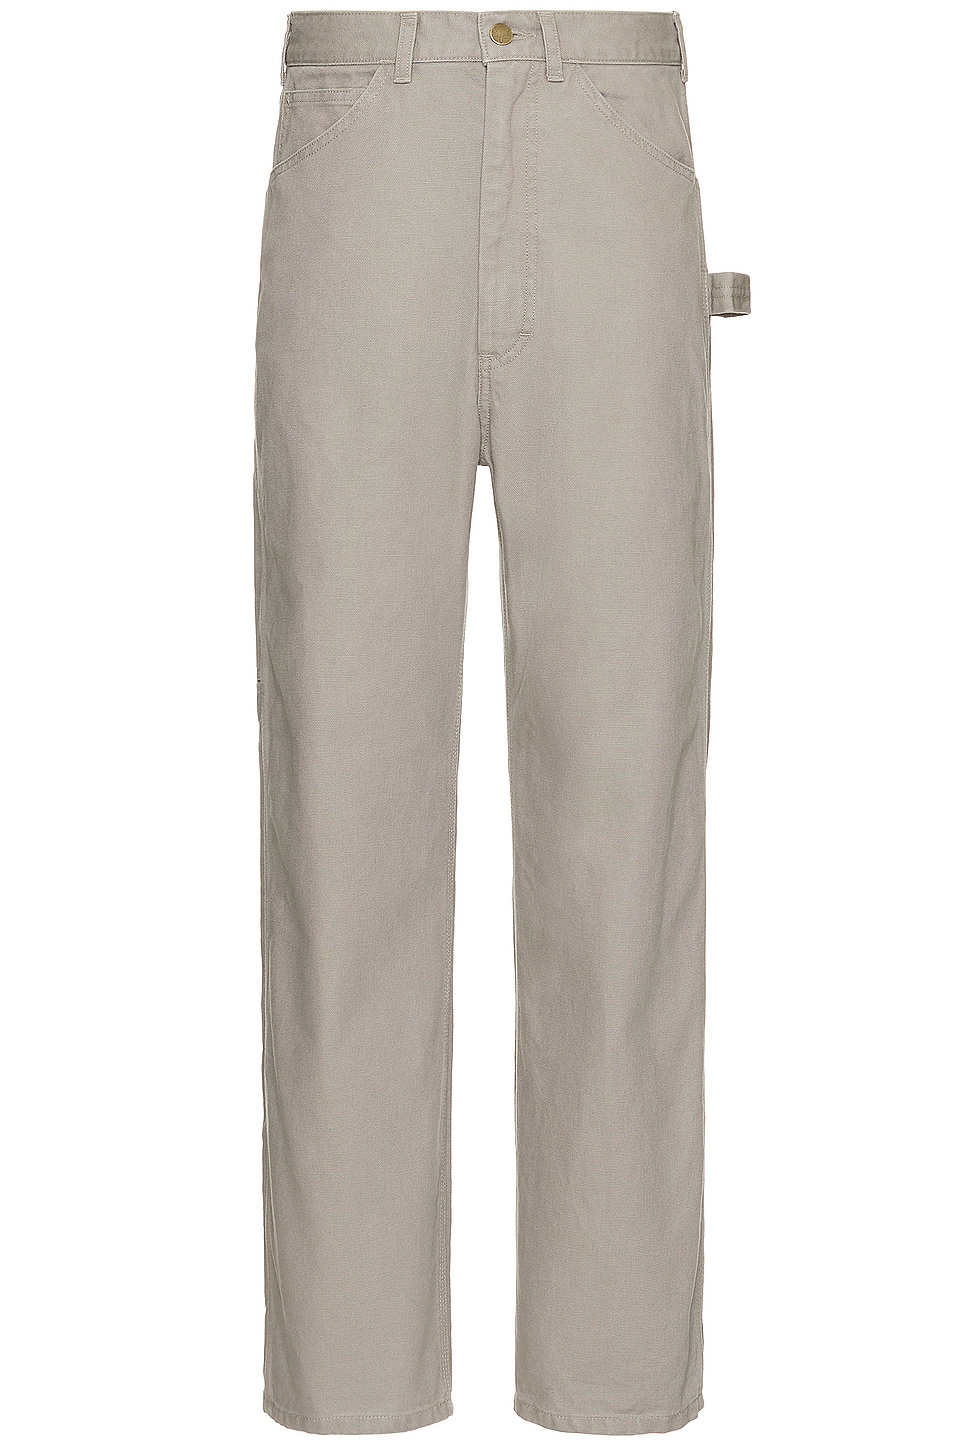 Image 1 of South2 West8 Painter Pant 115Oz Cotton Canvas in A-Grey